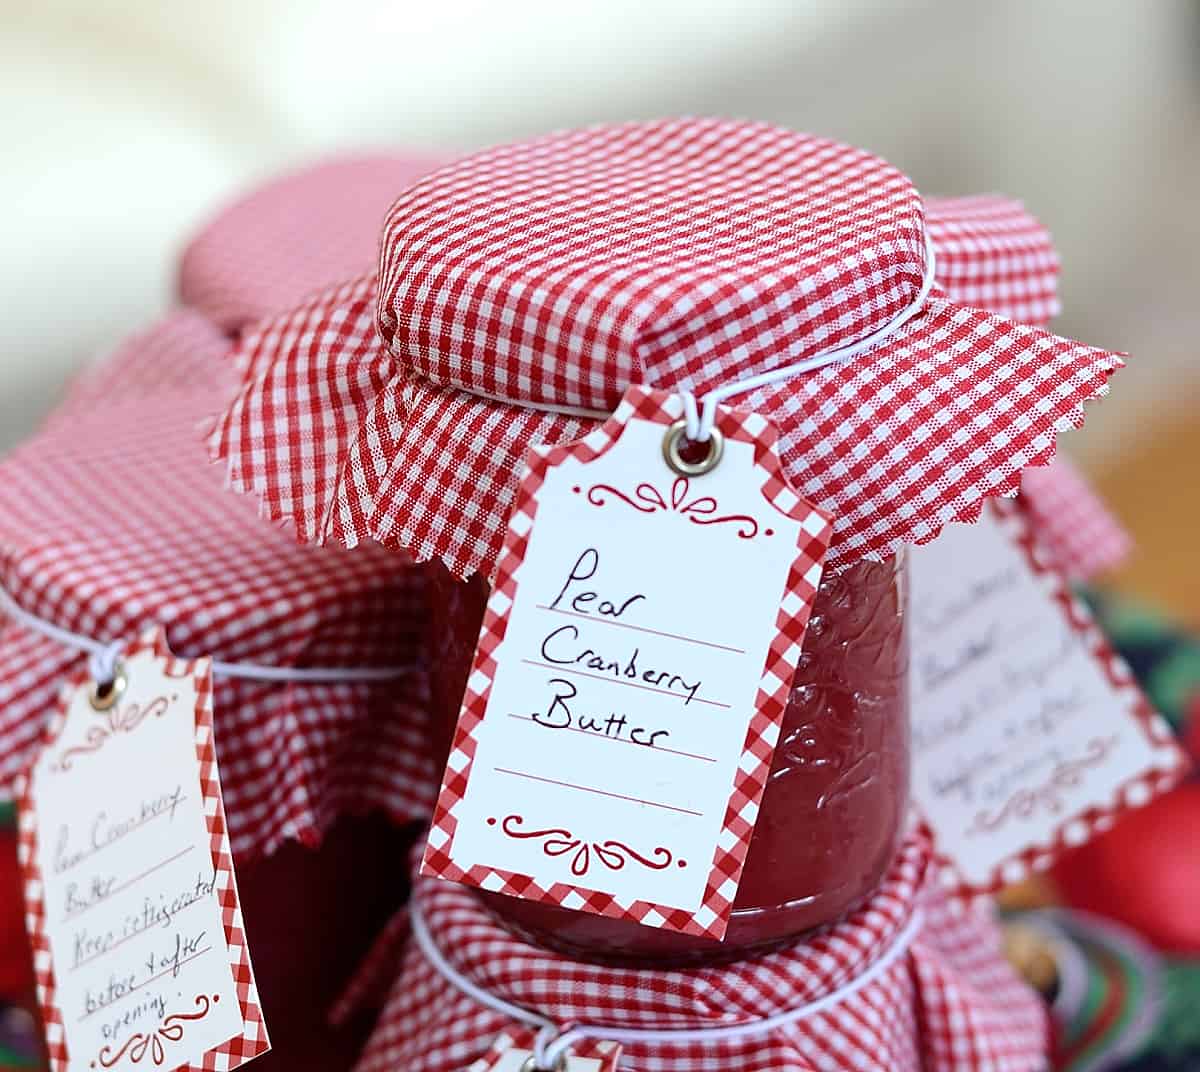 Half pint jar of pear cranberry butter with gingham cap and label